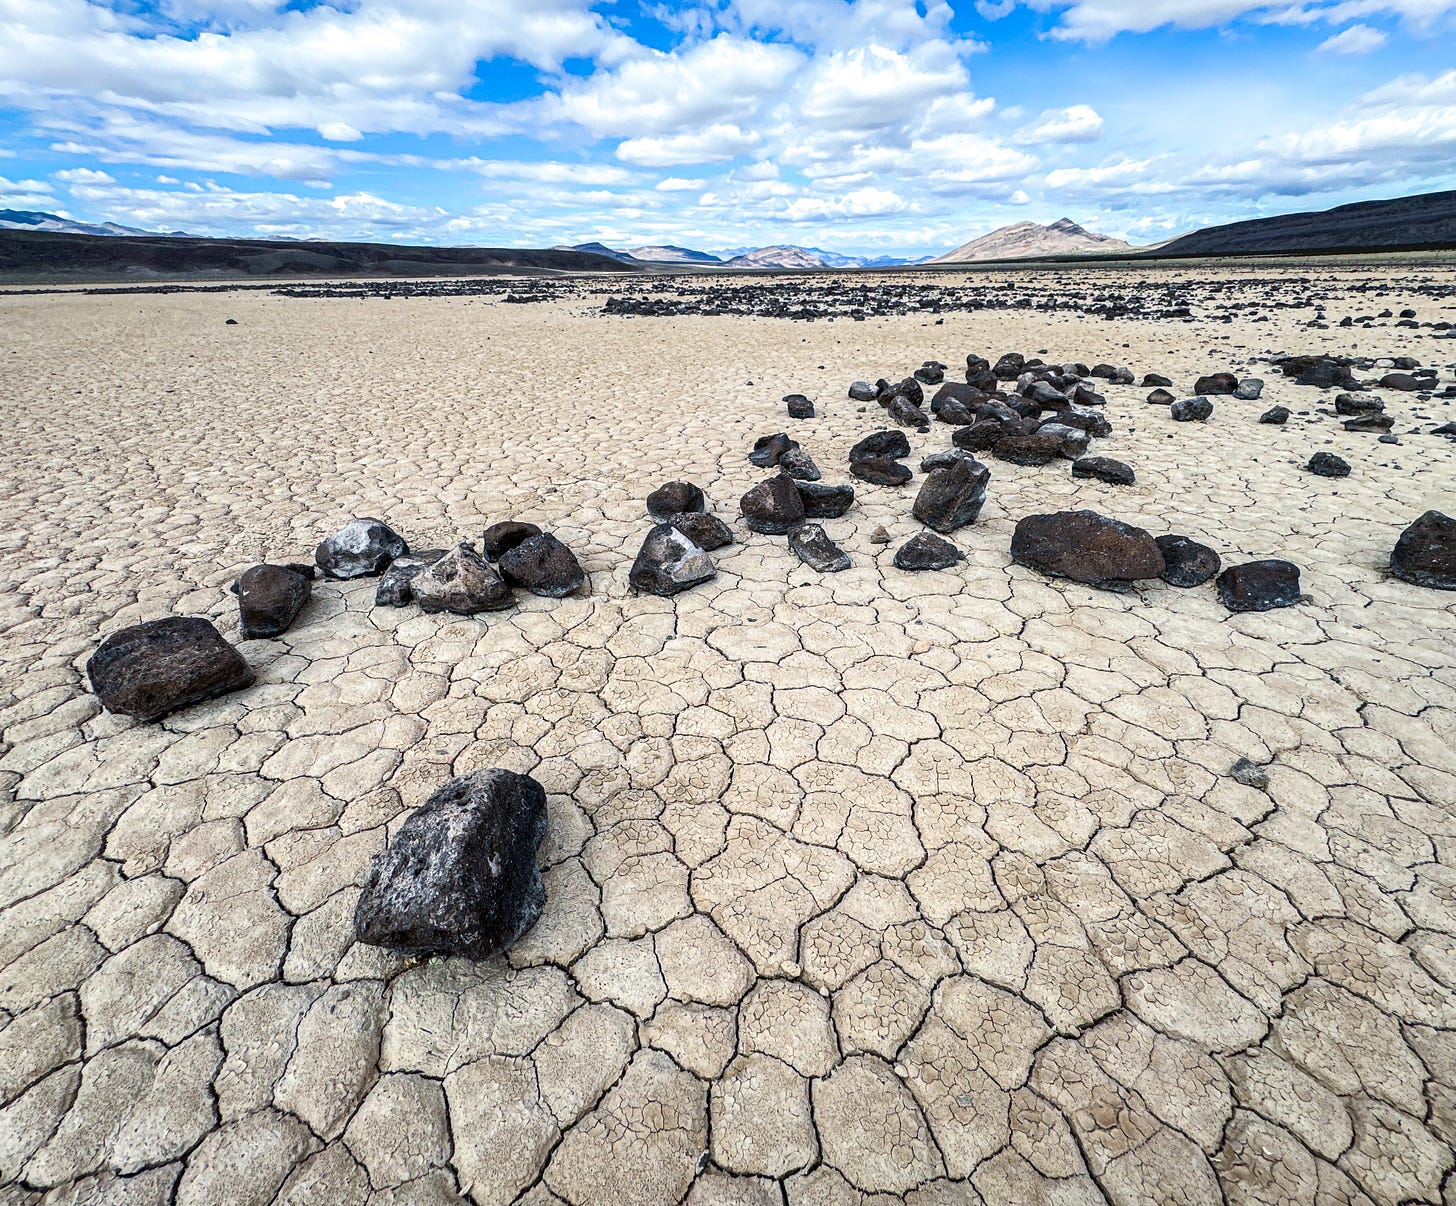 dry lake bed with rocks and cracked mud